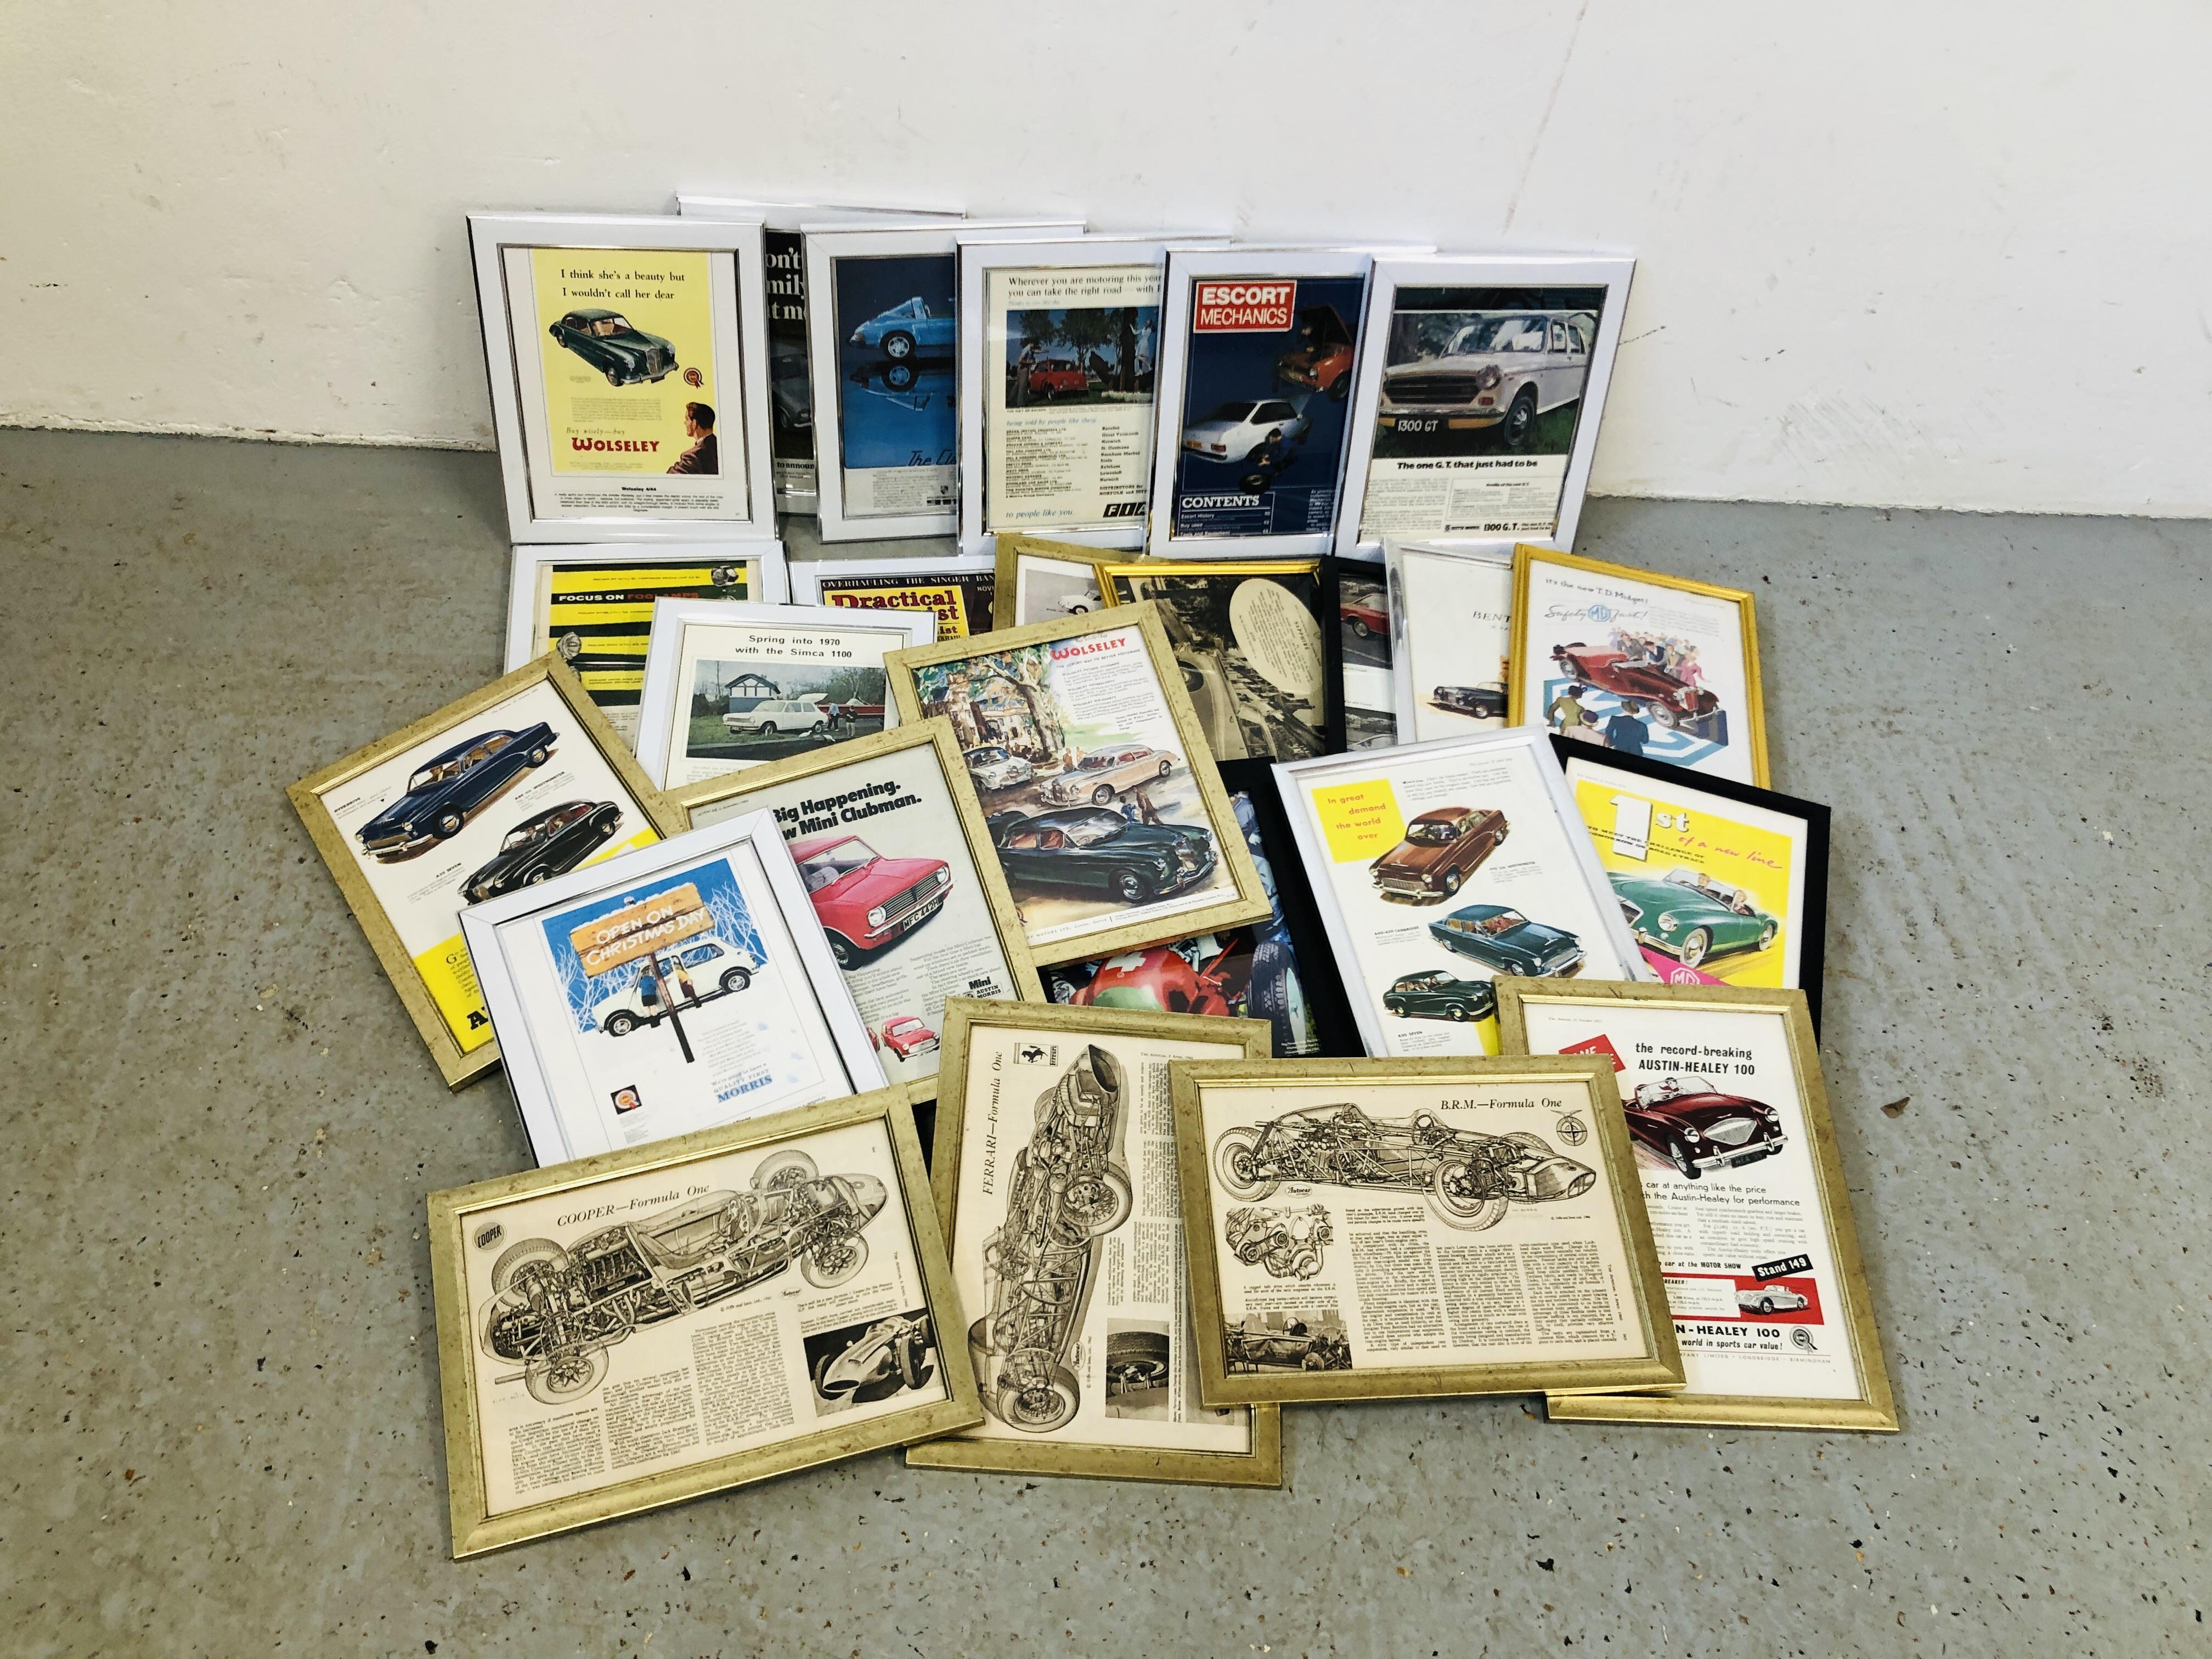 26 FRAMED MOTORING MAGAZINE CUTTINGS FROM THE 1950's AND 60's TO INCLUDE ADVERTS FIAT,